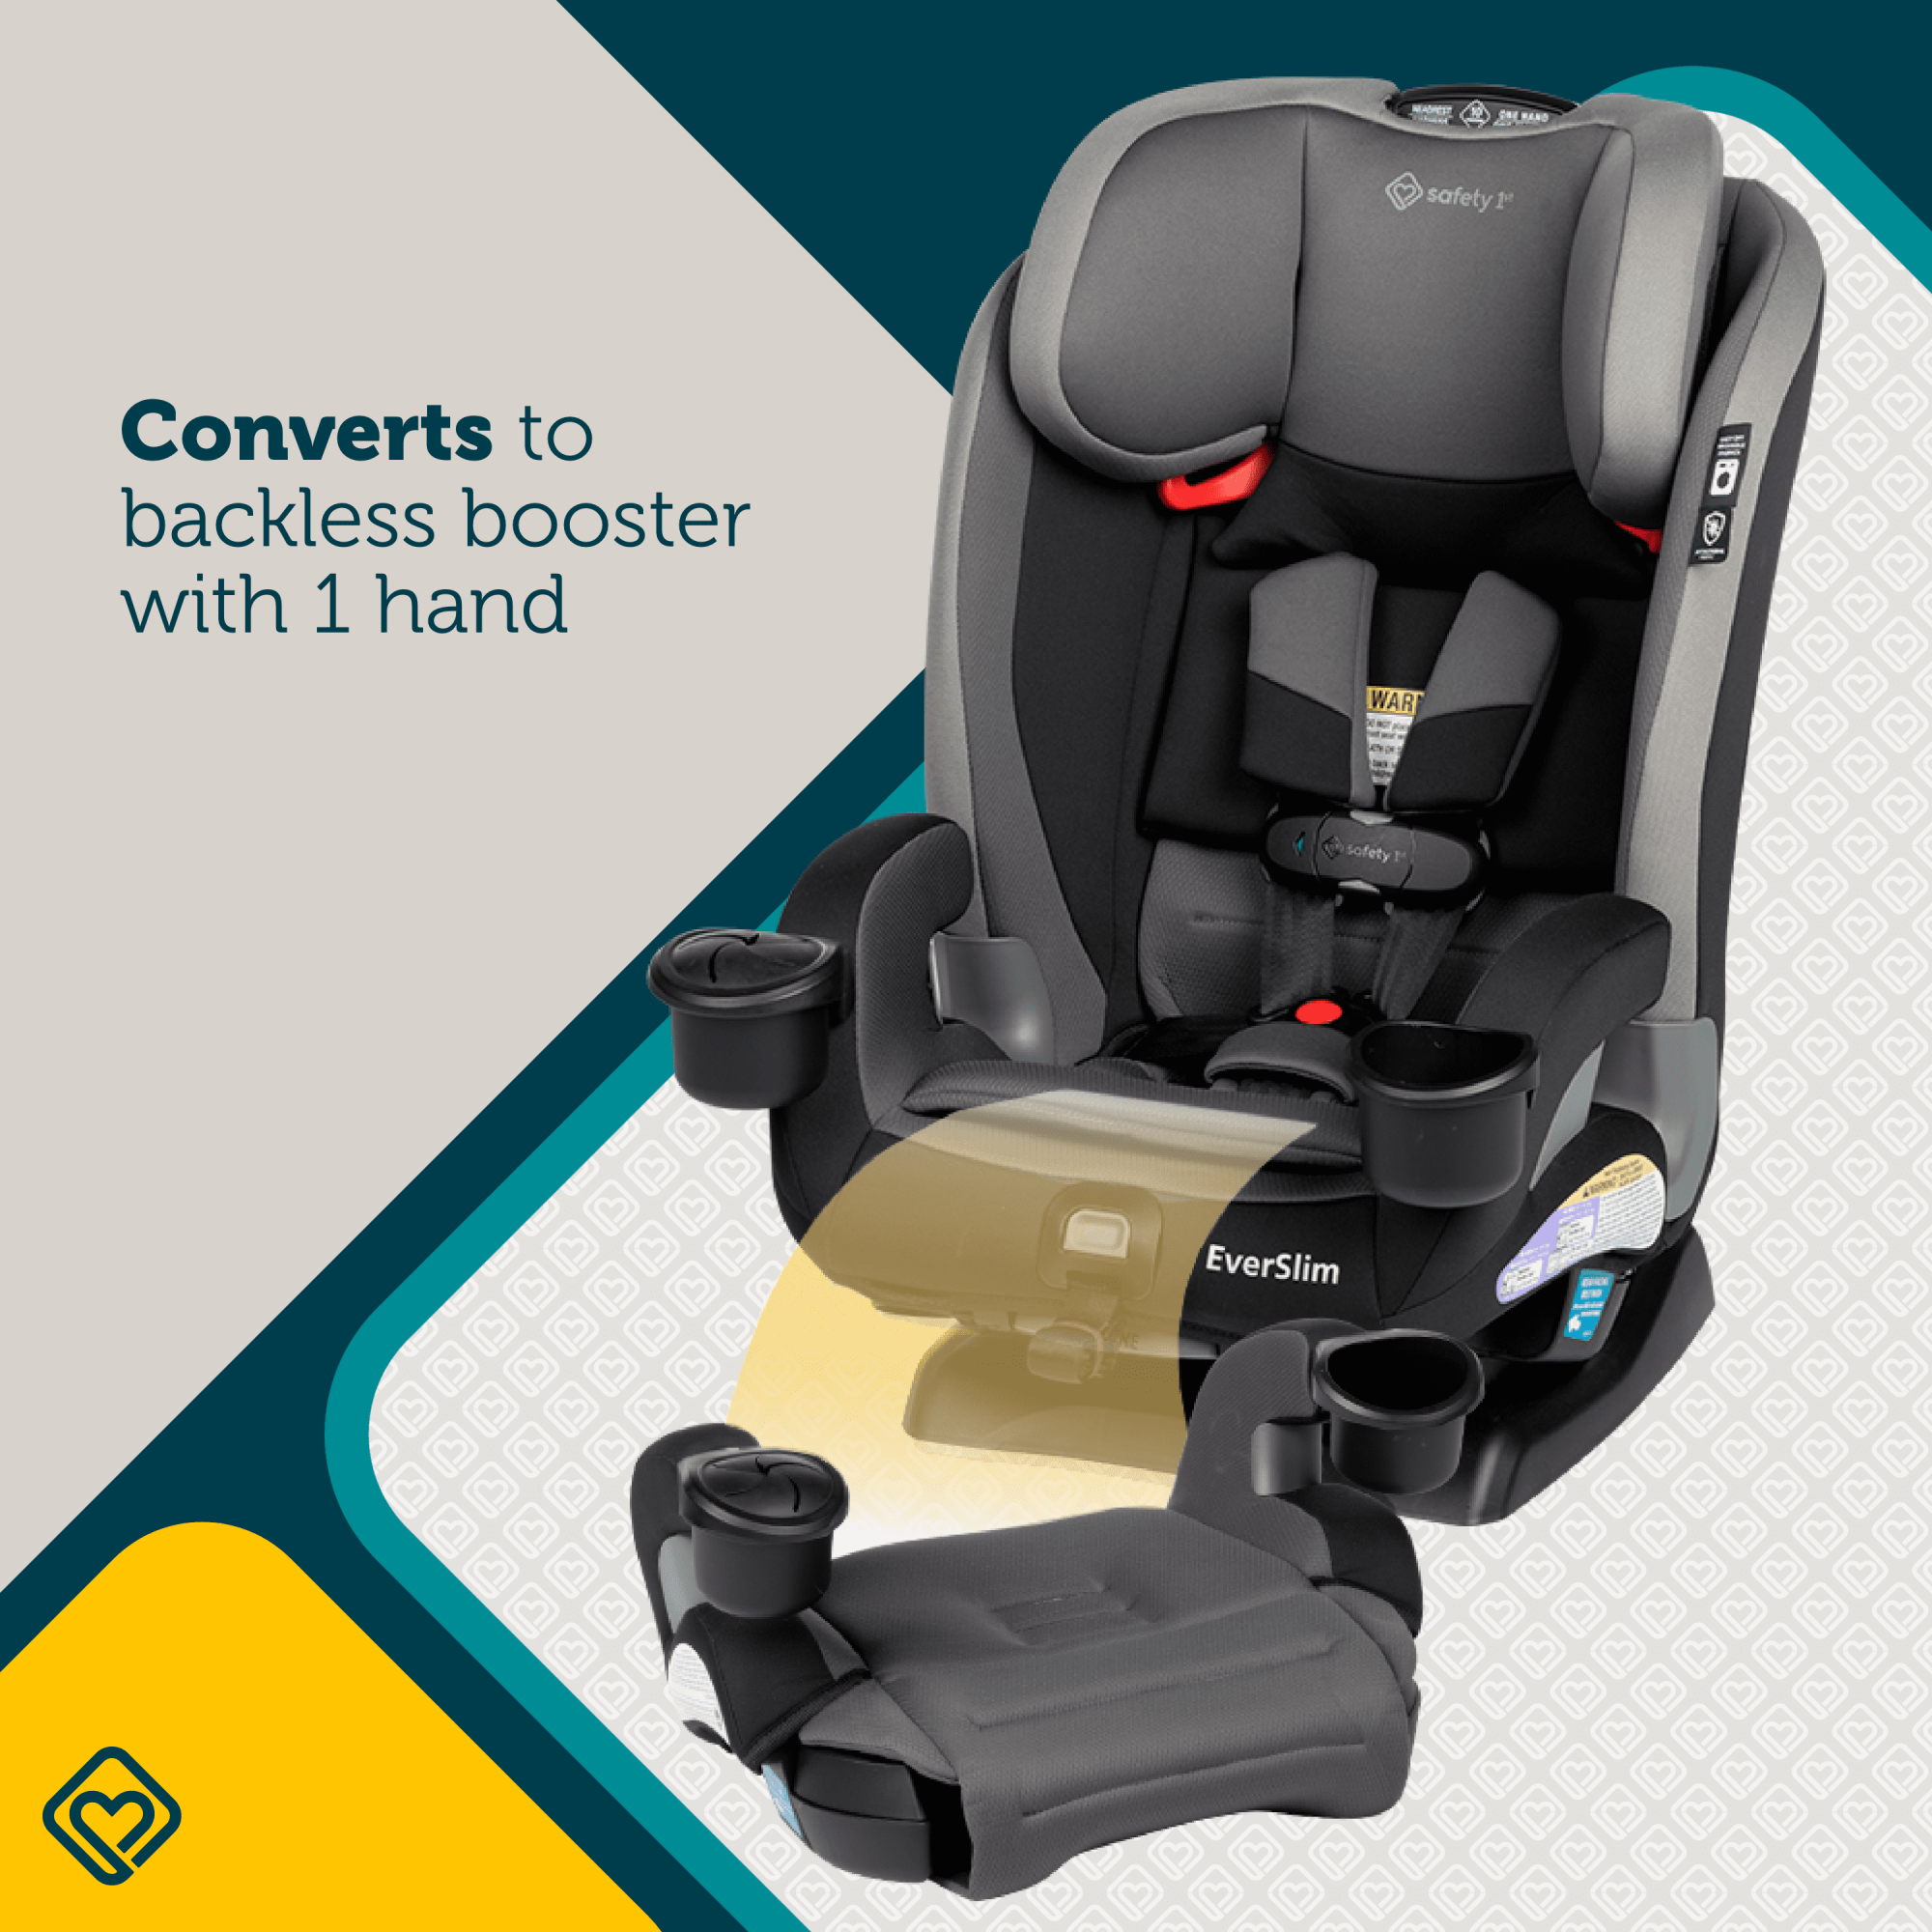 EverSlim 4-Mode All-in-One Convertible Car Seat - converts to backless booster with 1 hand